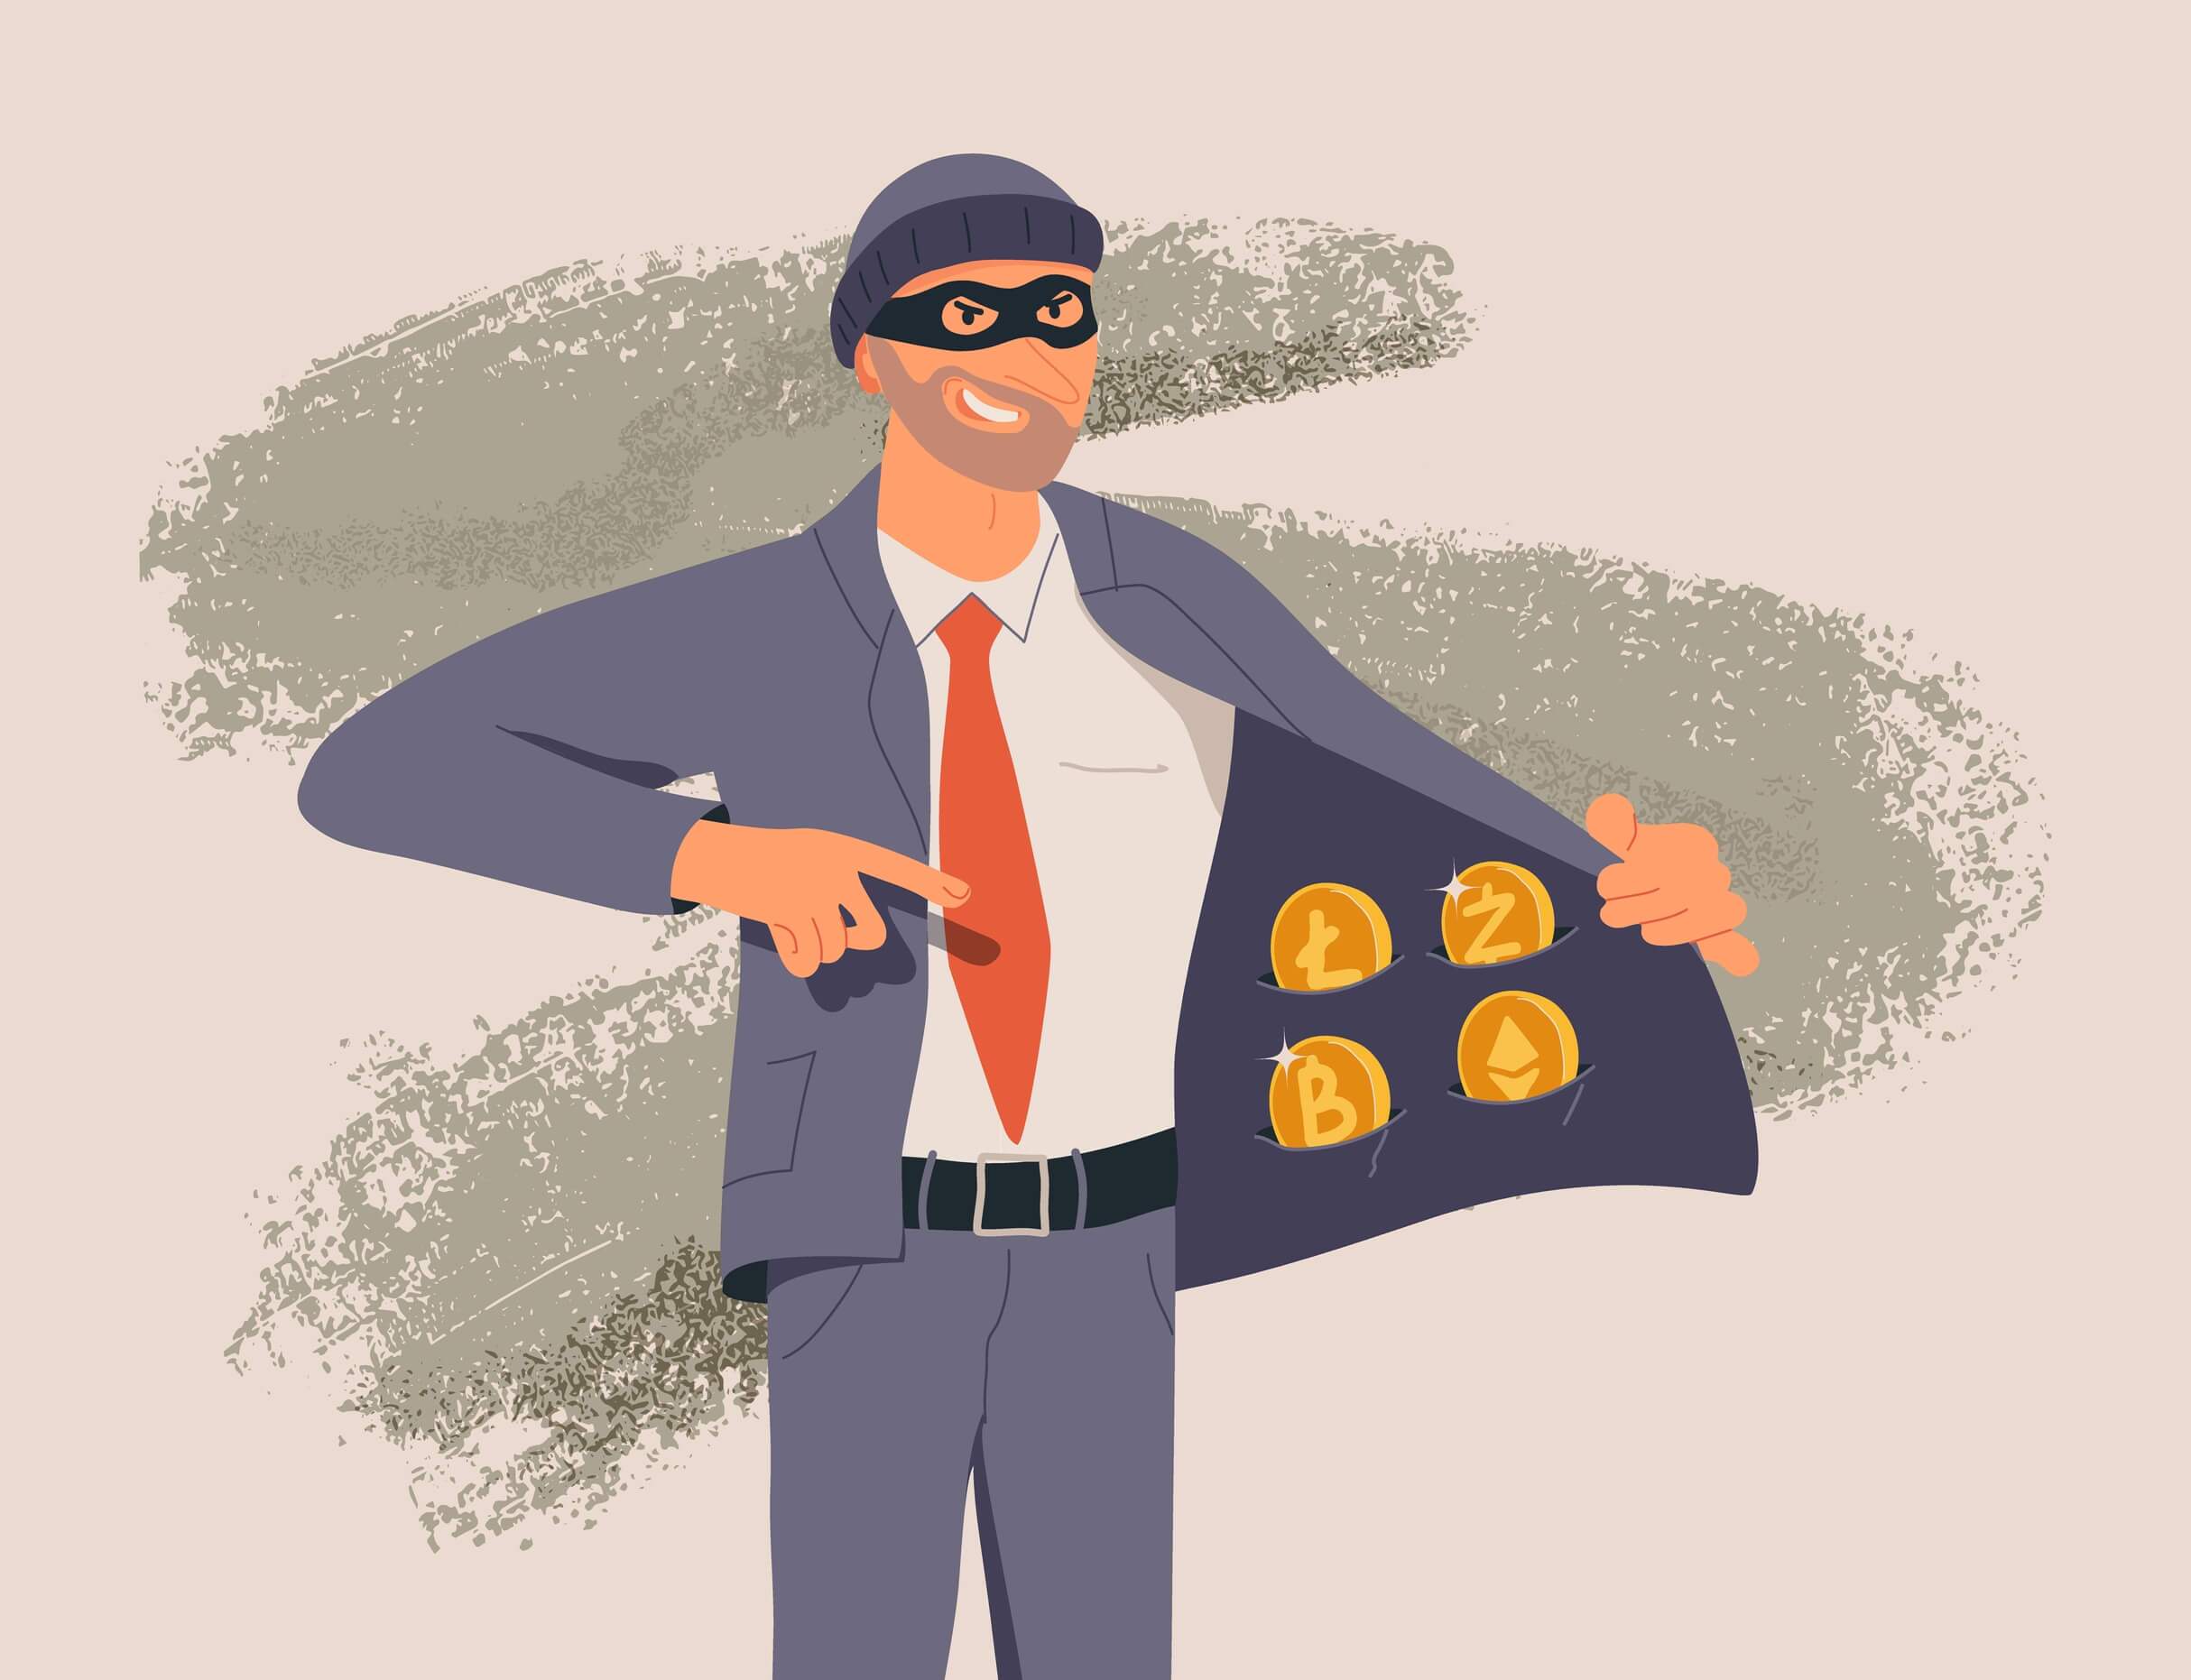 Illustration to depict bitcoin crypto scams